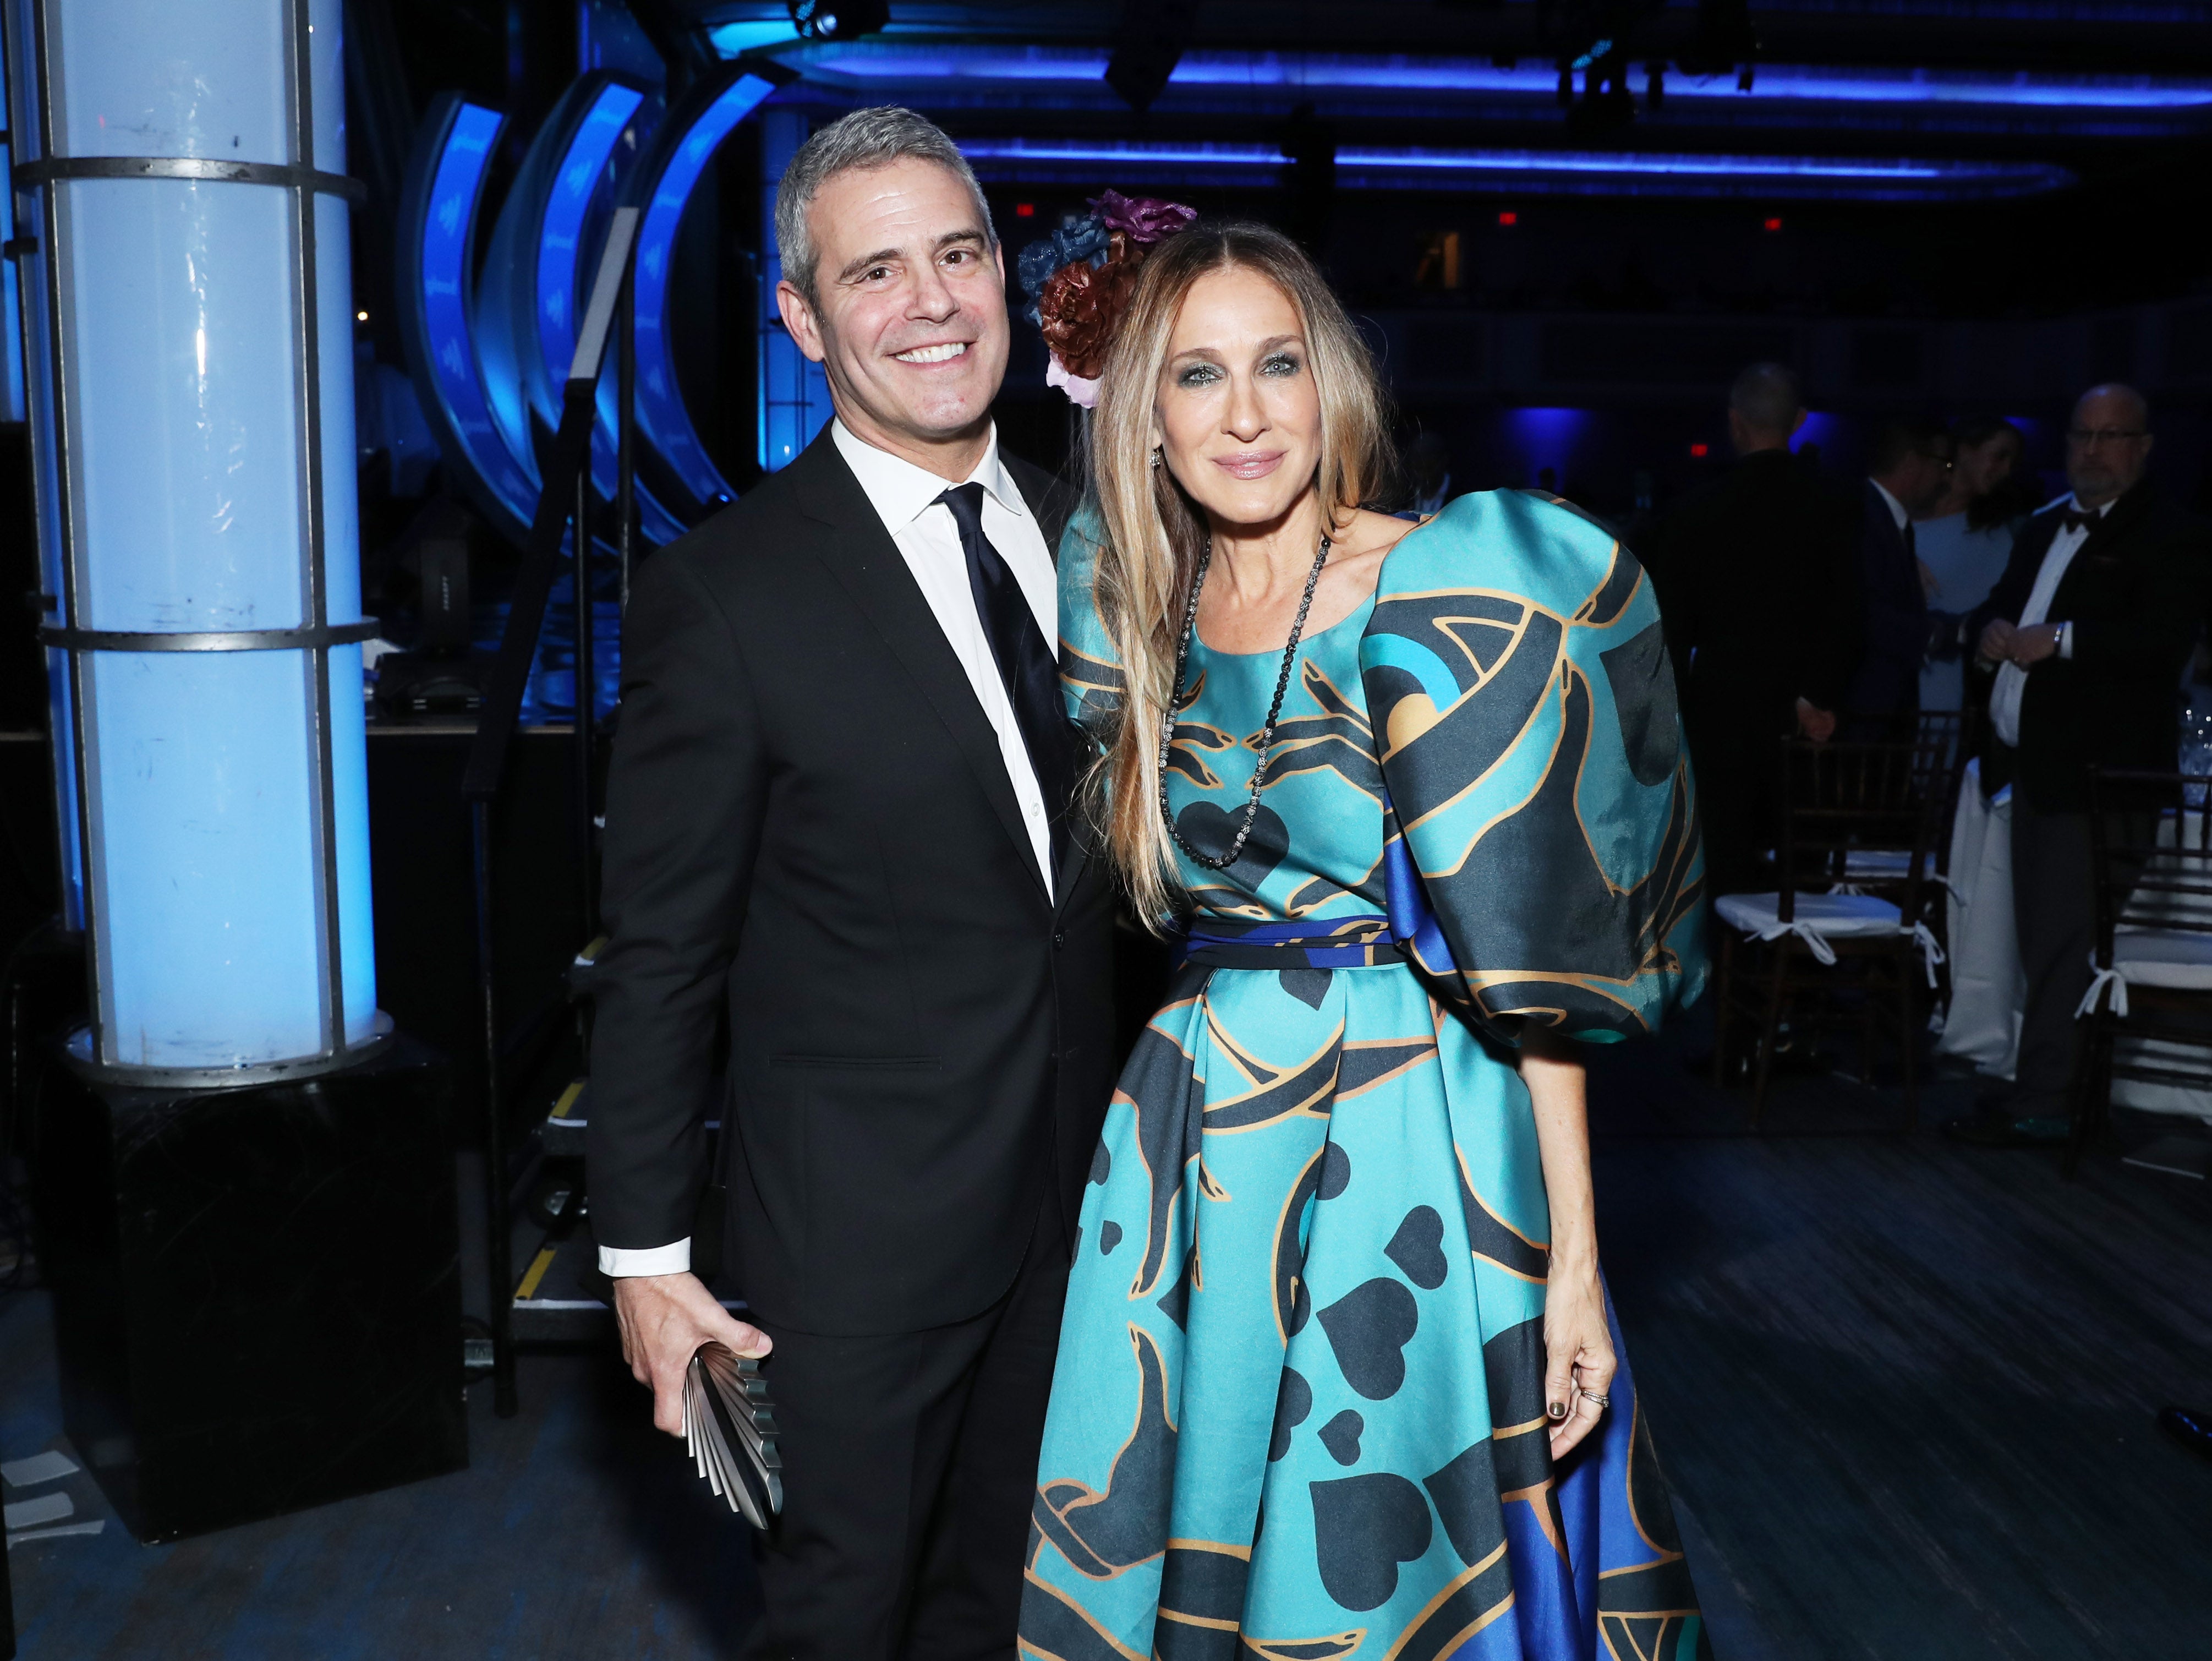 Andy Cohen and Sarah Jessica Parker attend the 30th Annual GLAAD Media Awards in partnership with Ketel One Family-Made Vodka, longstanding ally of the LGBTQ community on May 04, 2019